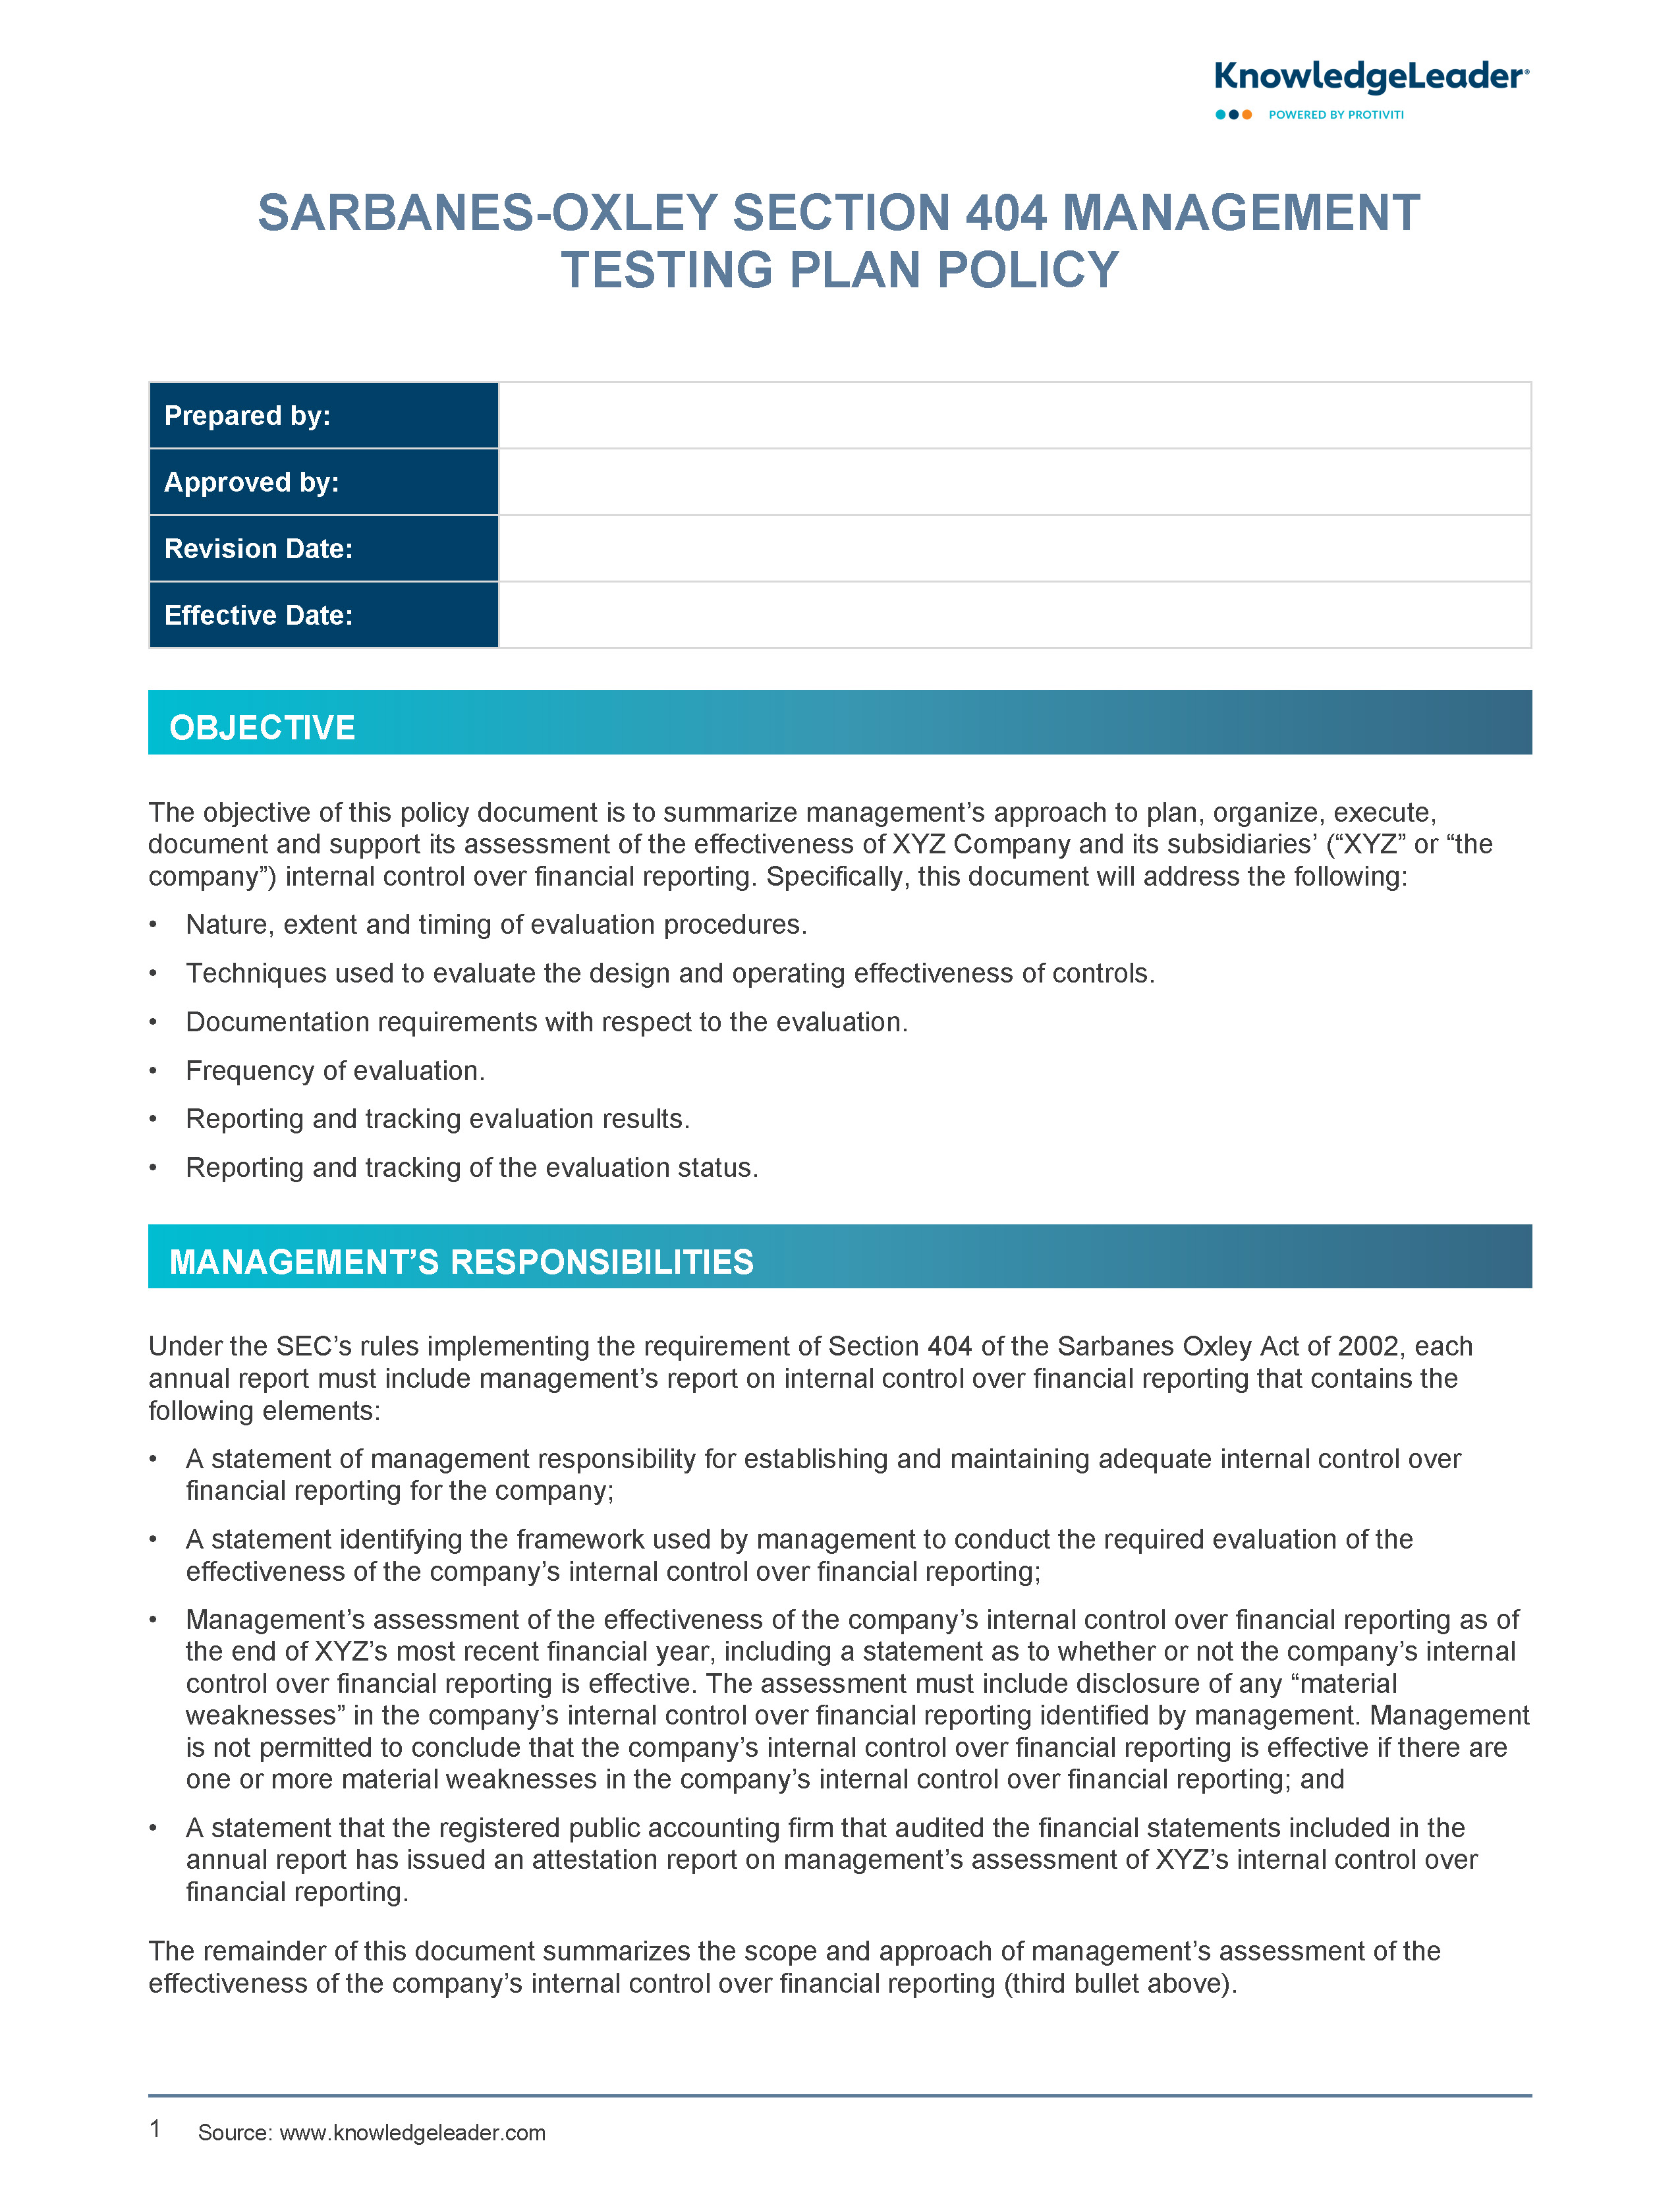 Sarbanes-Oxley Section 404 Management Testing Plan Policy